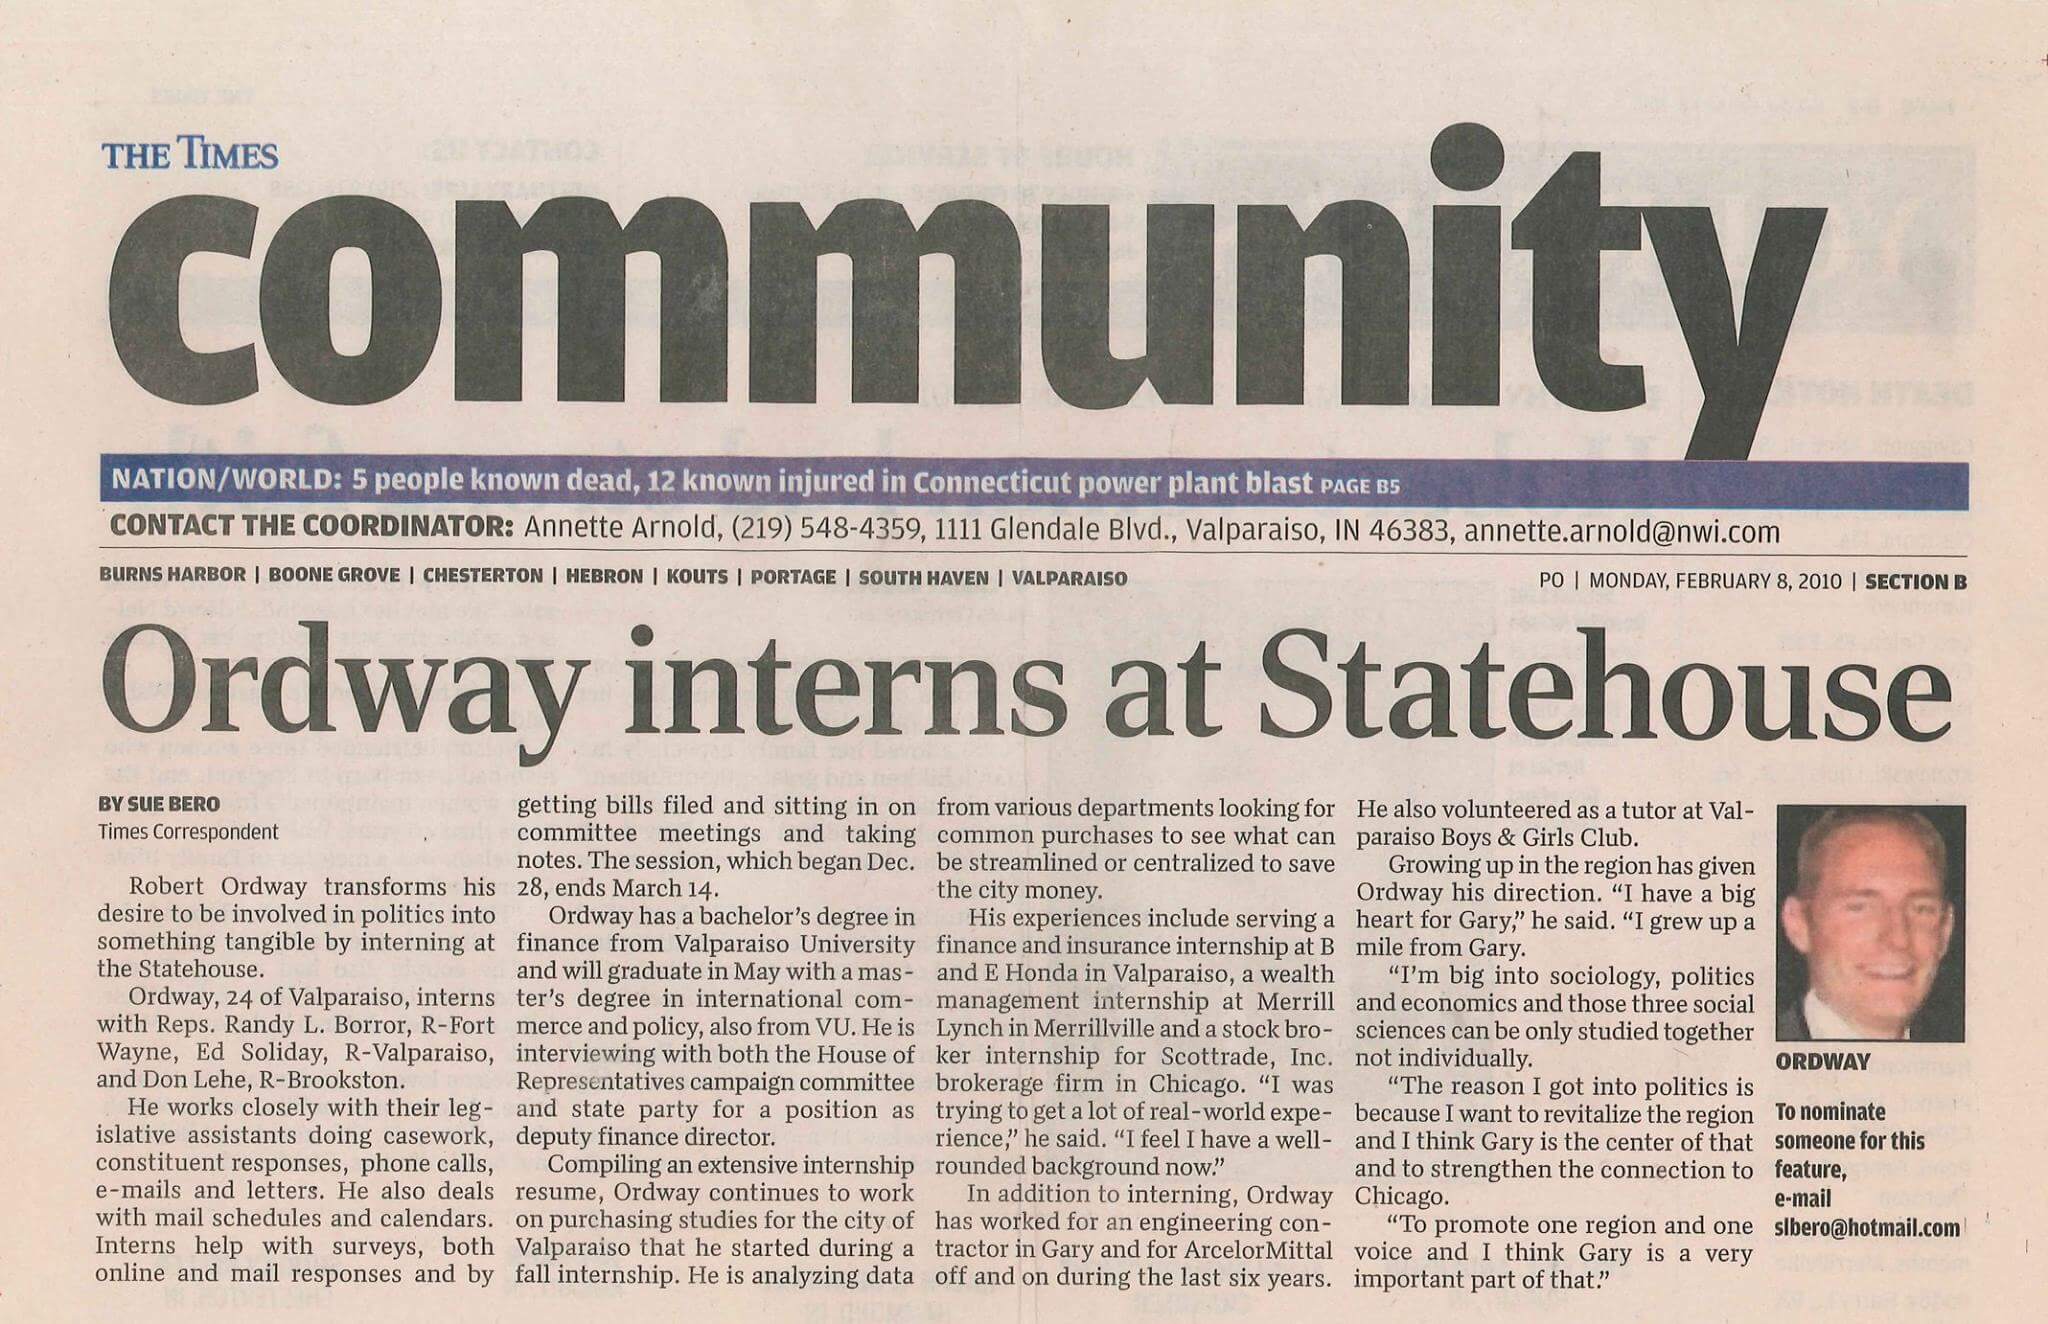 Ordway interns at Statehouse